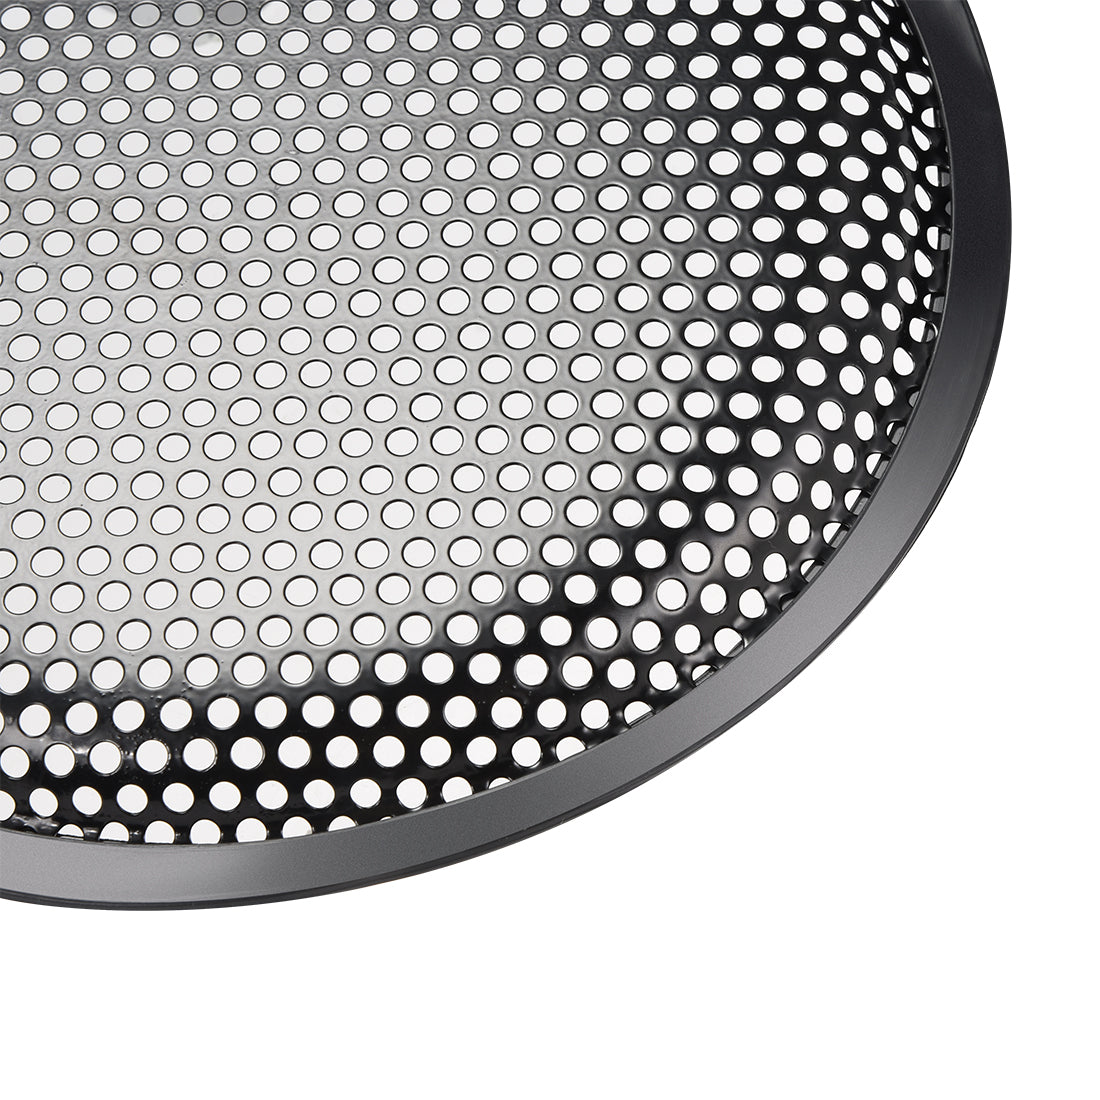 uxcell Uxcell 15" Speaker Waffle Grill Metal Mesh Audio Subwoofer Guard Protector Cover with Clips,Screws